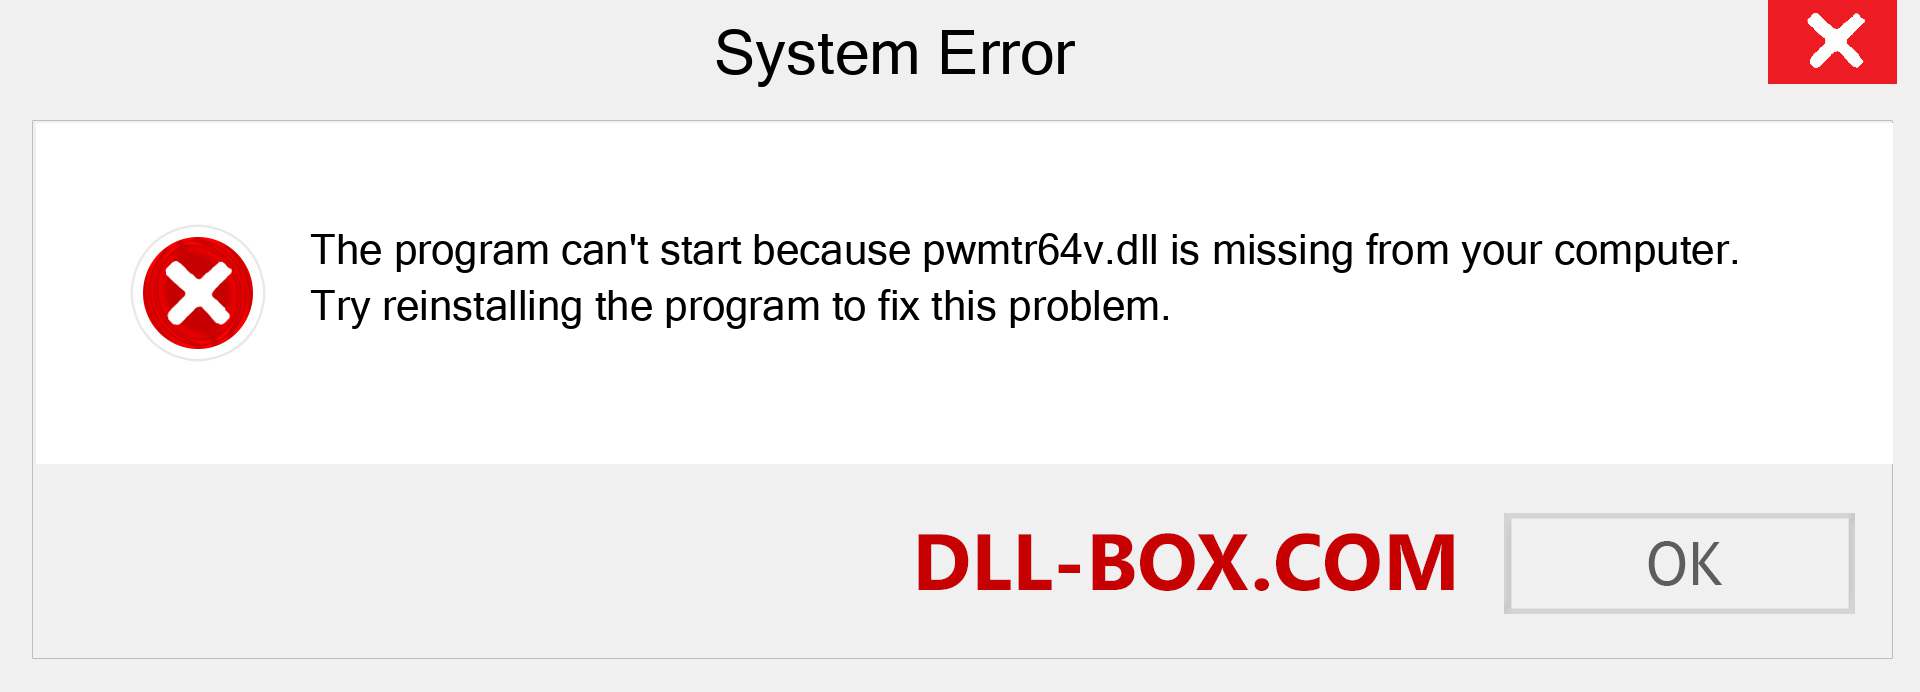  pwmtr64v.dll file is missing?. Download for Windows 7, 8, 10 - Fix  pwmtr64v dll Missing Error on Windows, photos, images